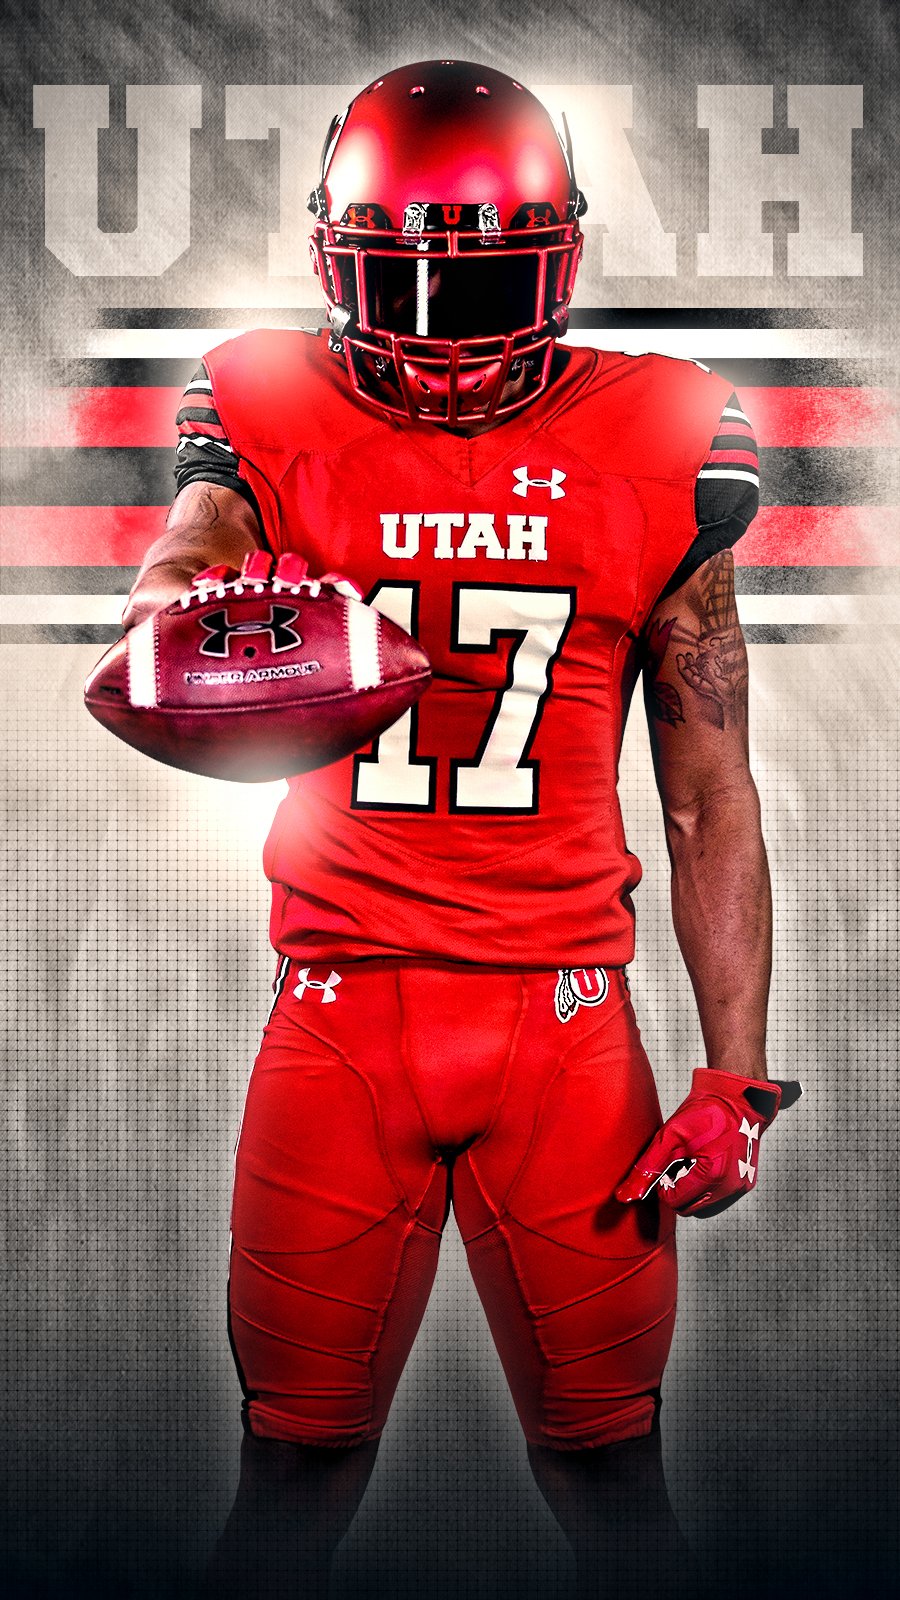 Utah Football your phone and desktop wallpaper to feature the new uniforms